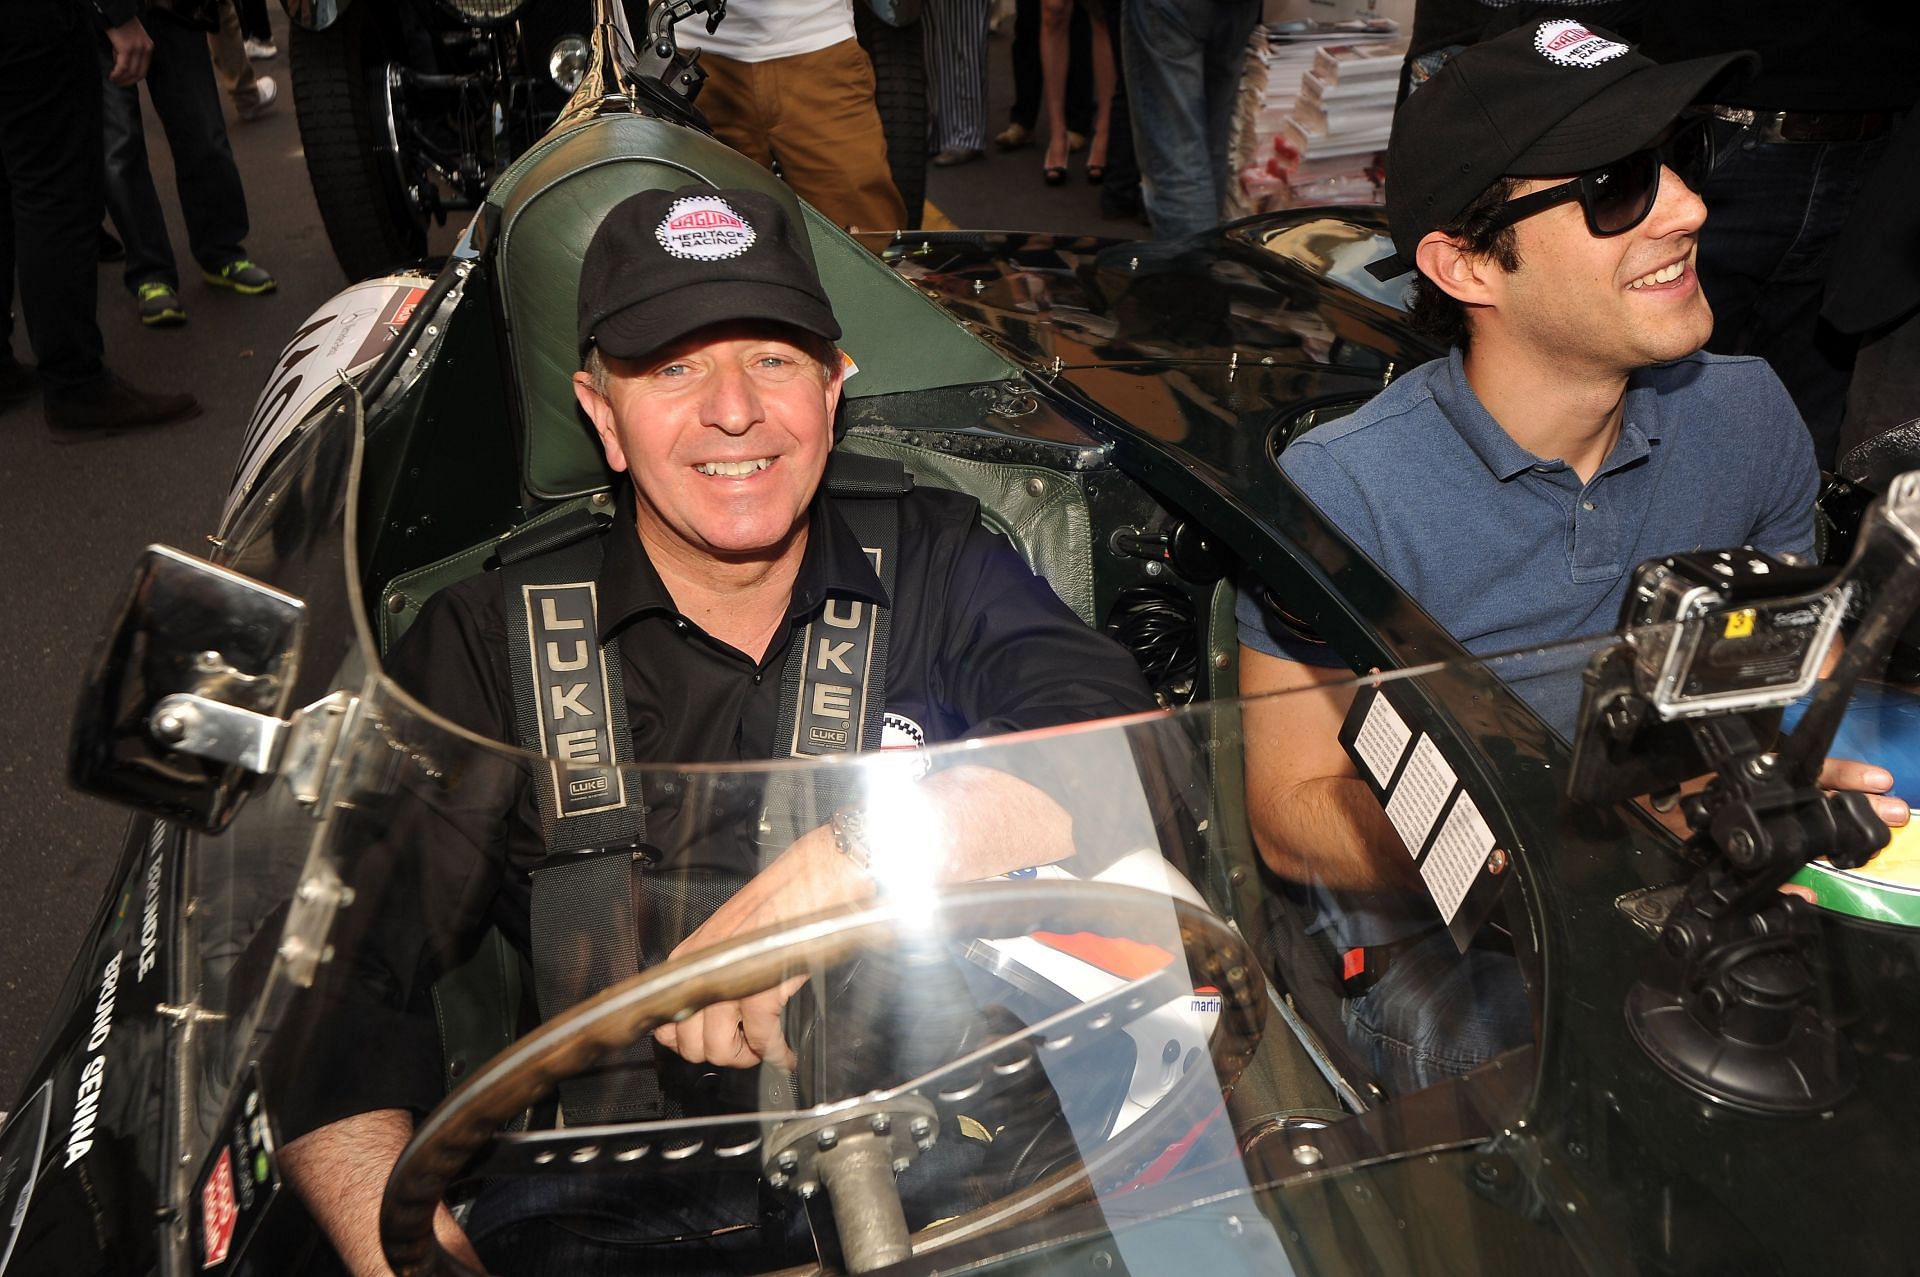 Martin Brundle at the Mille Miglia 2014